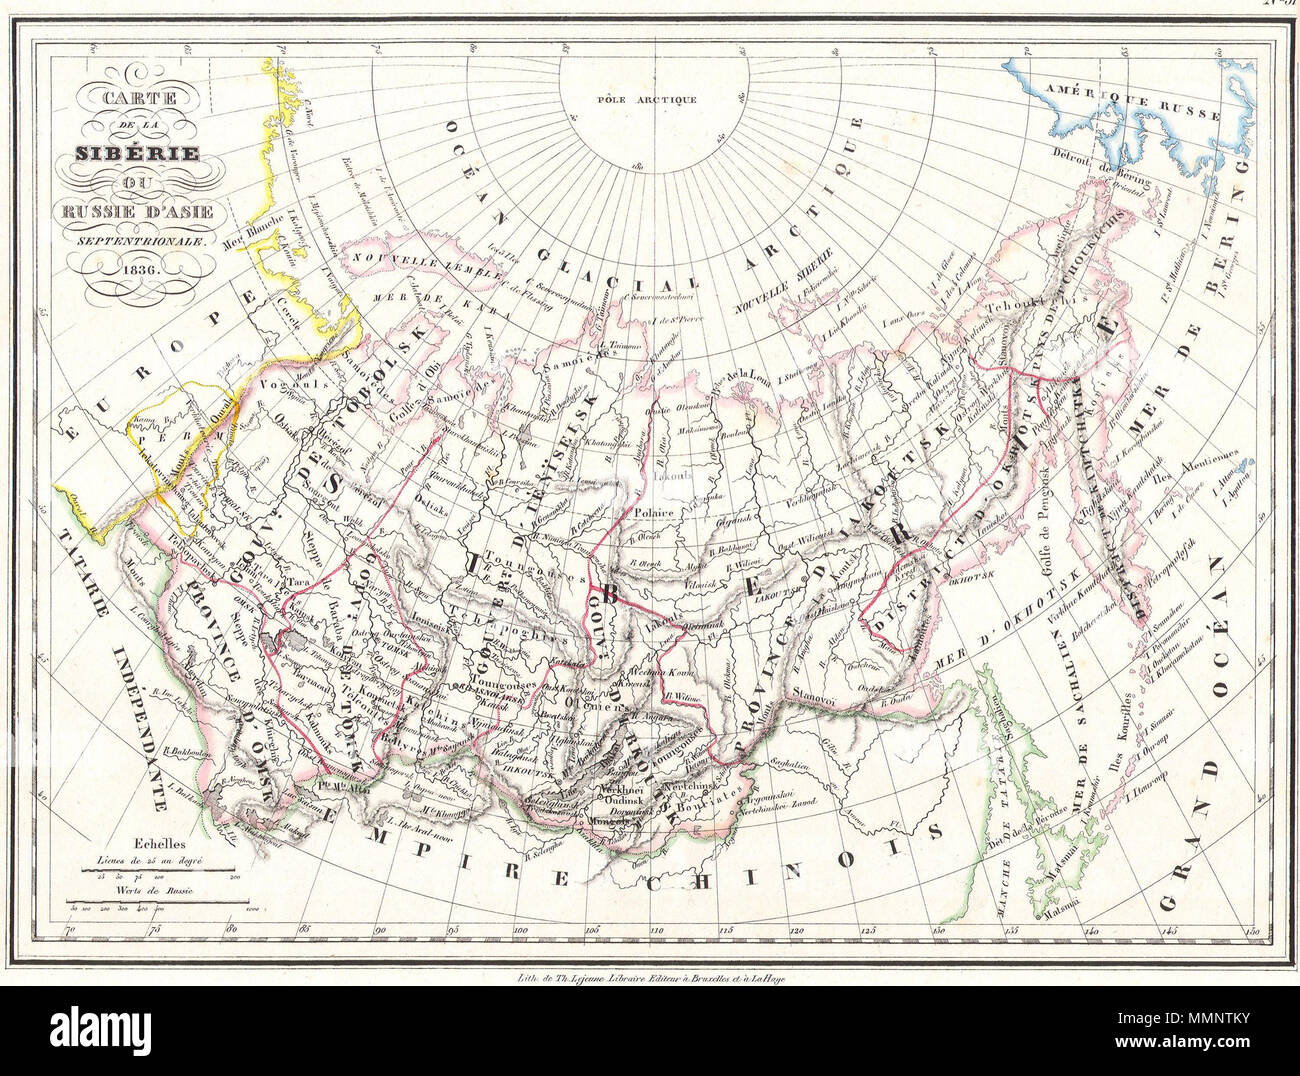 .  English: This unusual 1836 map by V. A. Malte-brun depicts Russia in Asia or Siberia. Depicts from the Ural mountains east as far as the Bering Strait and Alaska and as far south as the Chinese Empire. All text in French.  Carte de la Siberie ou Russie d’Asie Septentrionale. 1836... 1836. 7 1836 Malte-brun Map of Russia in Asia and Siberia - Geographicus - Siberie-mb-1836 Stock Photo